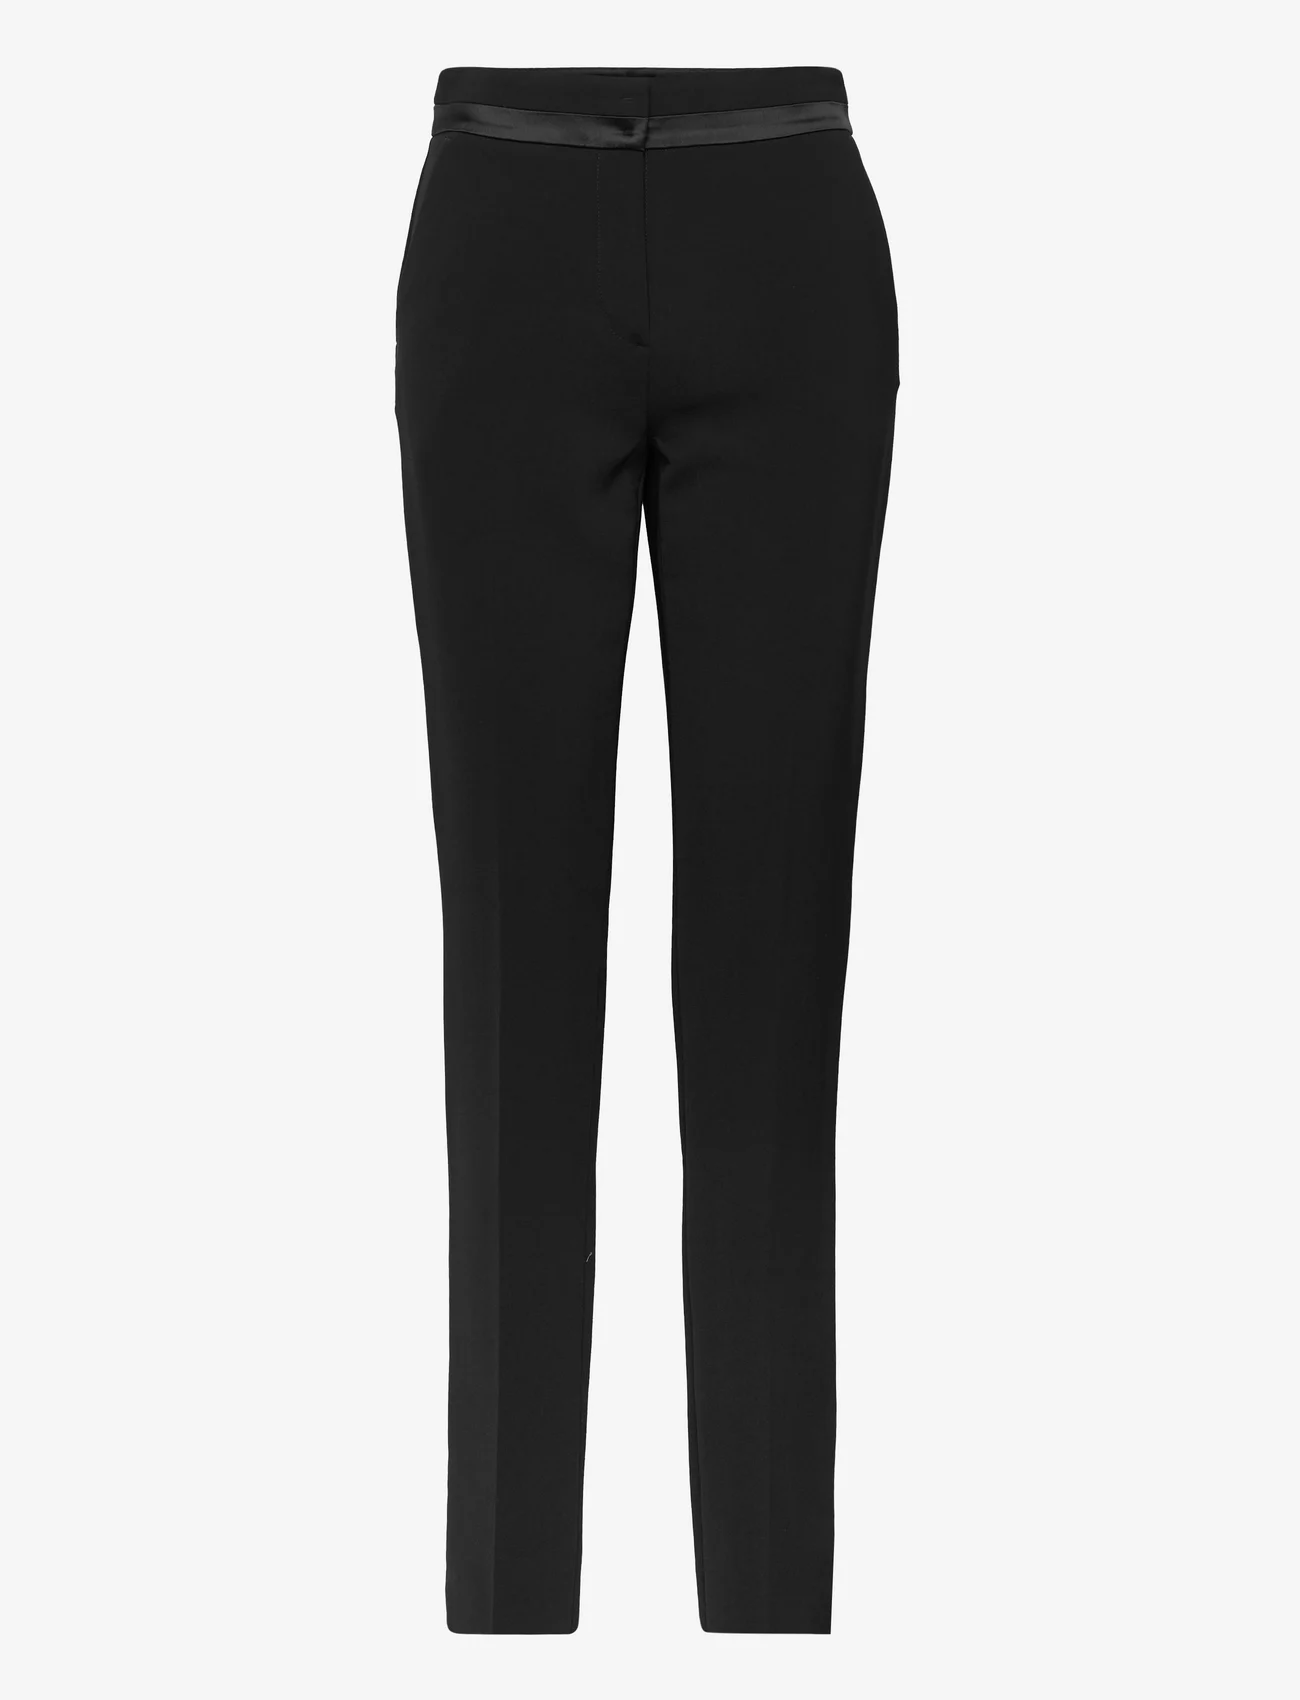 Emporio Armani - TROUSERS - trousers with skinny legs - nero - 0